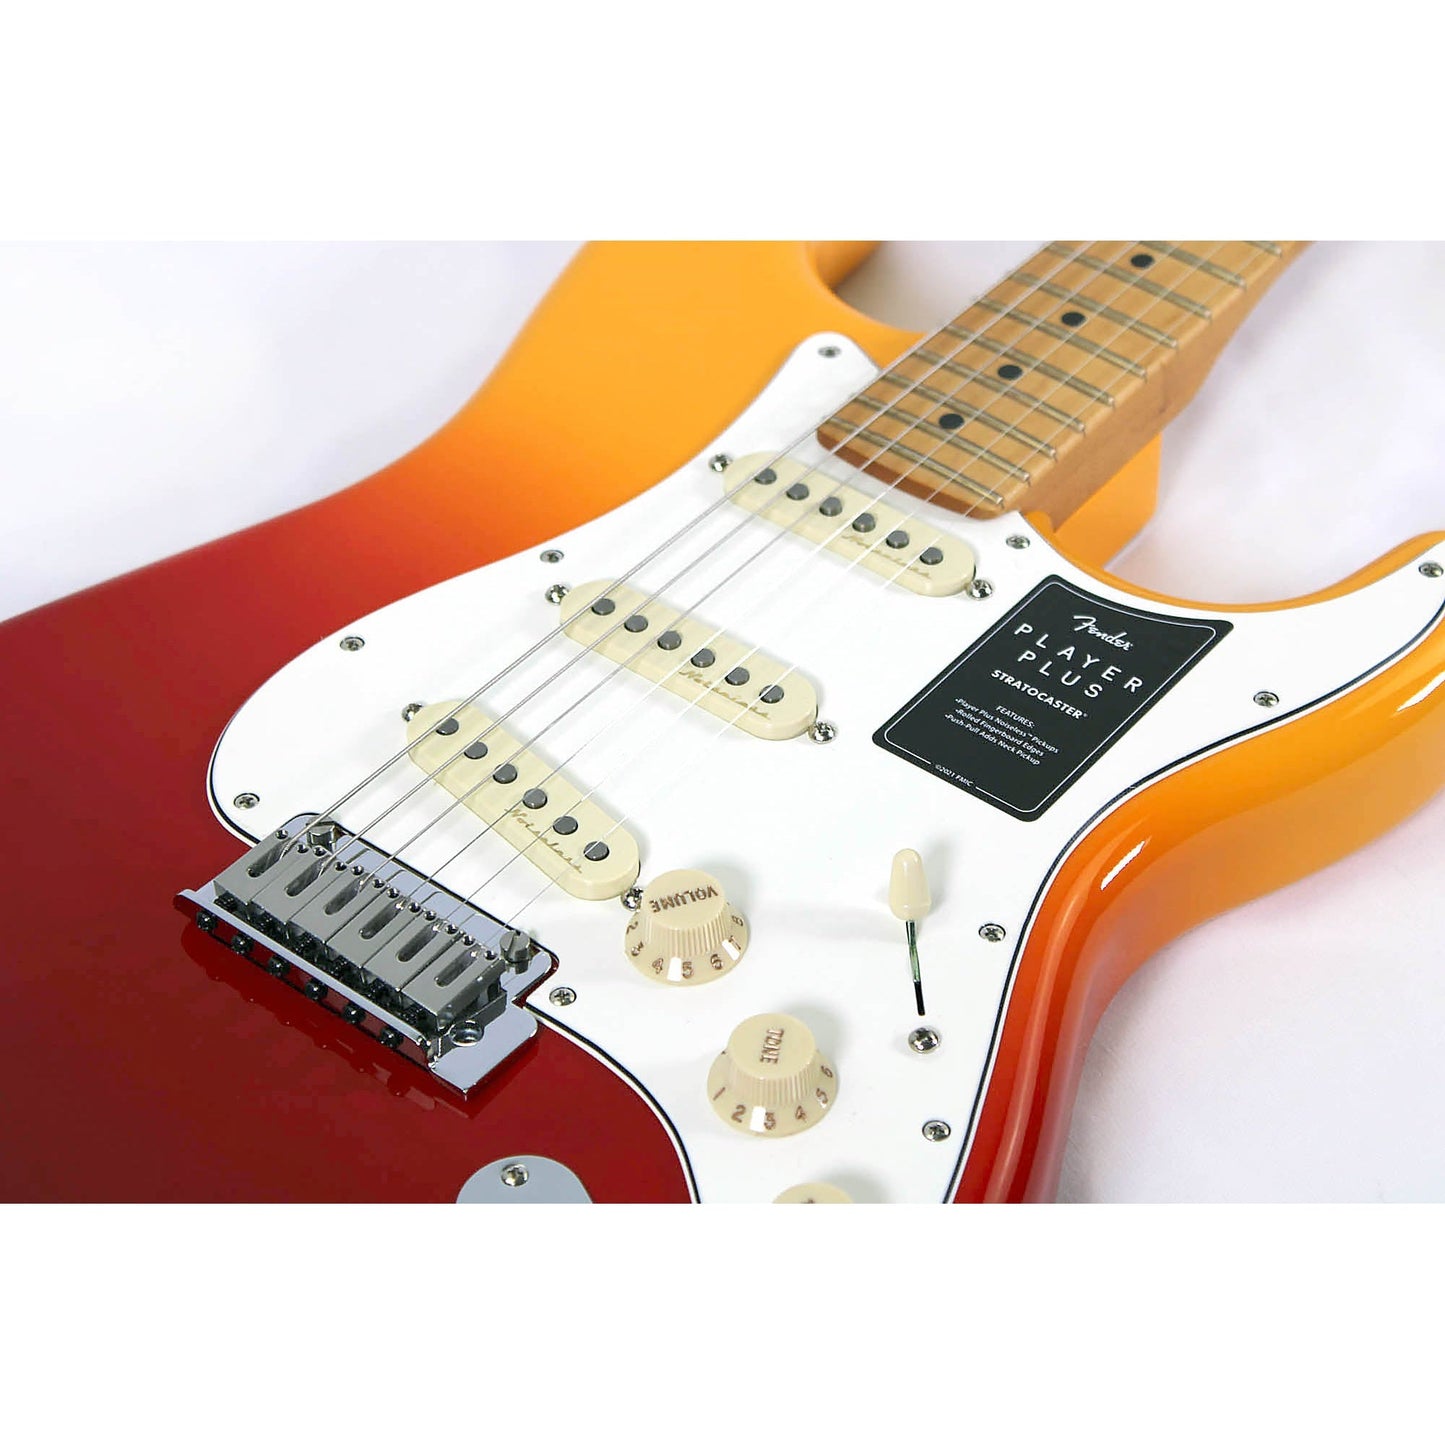 Fender Player Plus Stratocaster - Tequila Sunrise with Maple Neck - Leitz Music-885978742325-0147312387